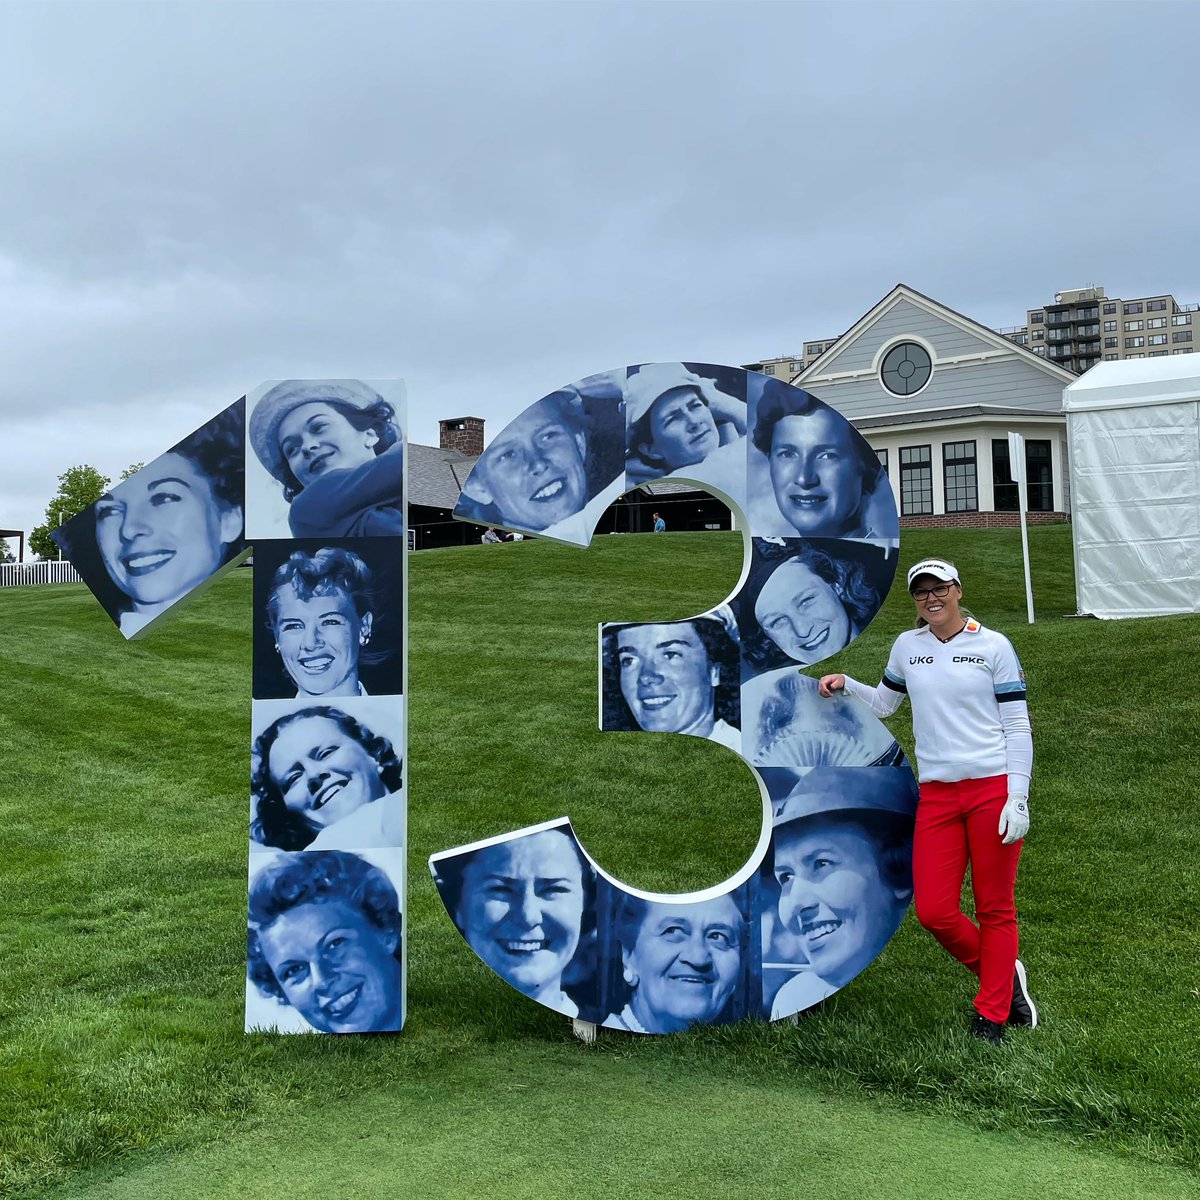 The founders of @LPGA Tour. 13 remarkably driven and talented women. I hope to act as they so courageously and inspiringly did. #ActLikeAFounder @LPGAfounders